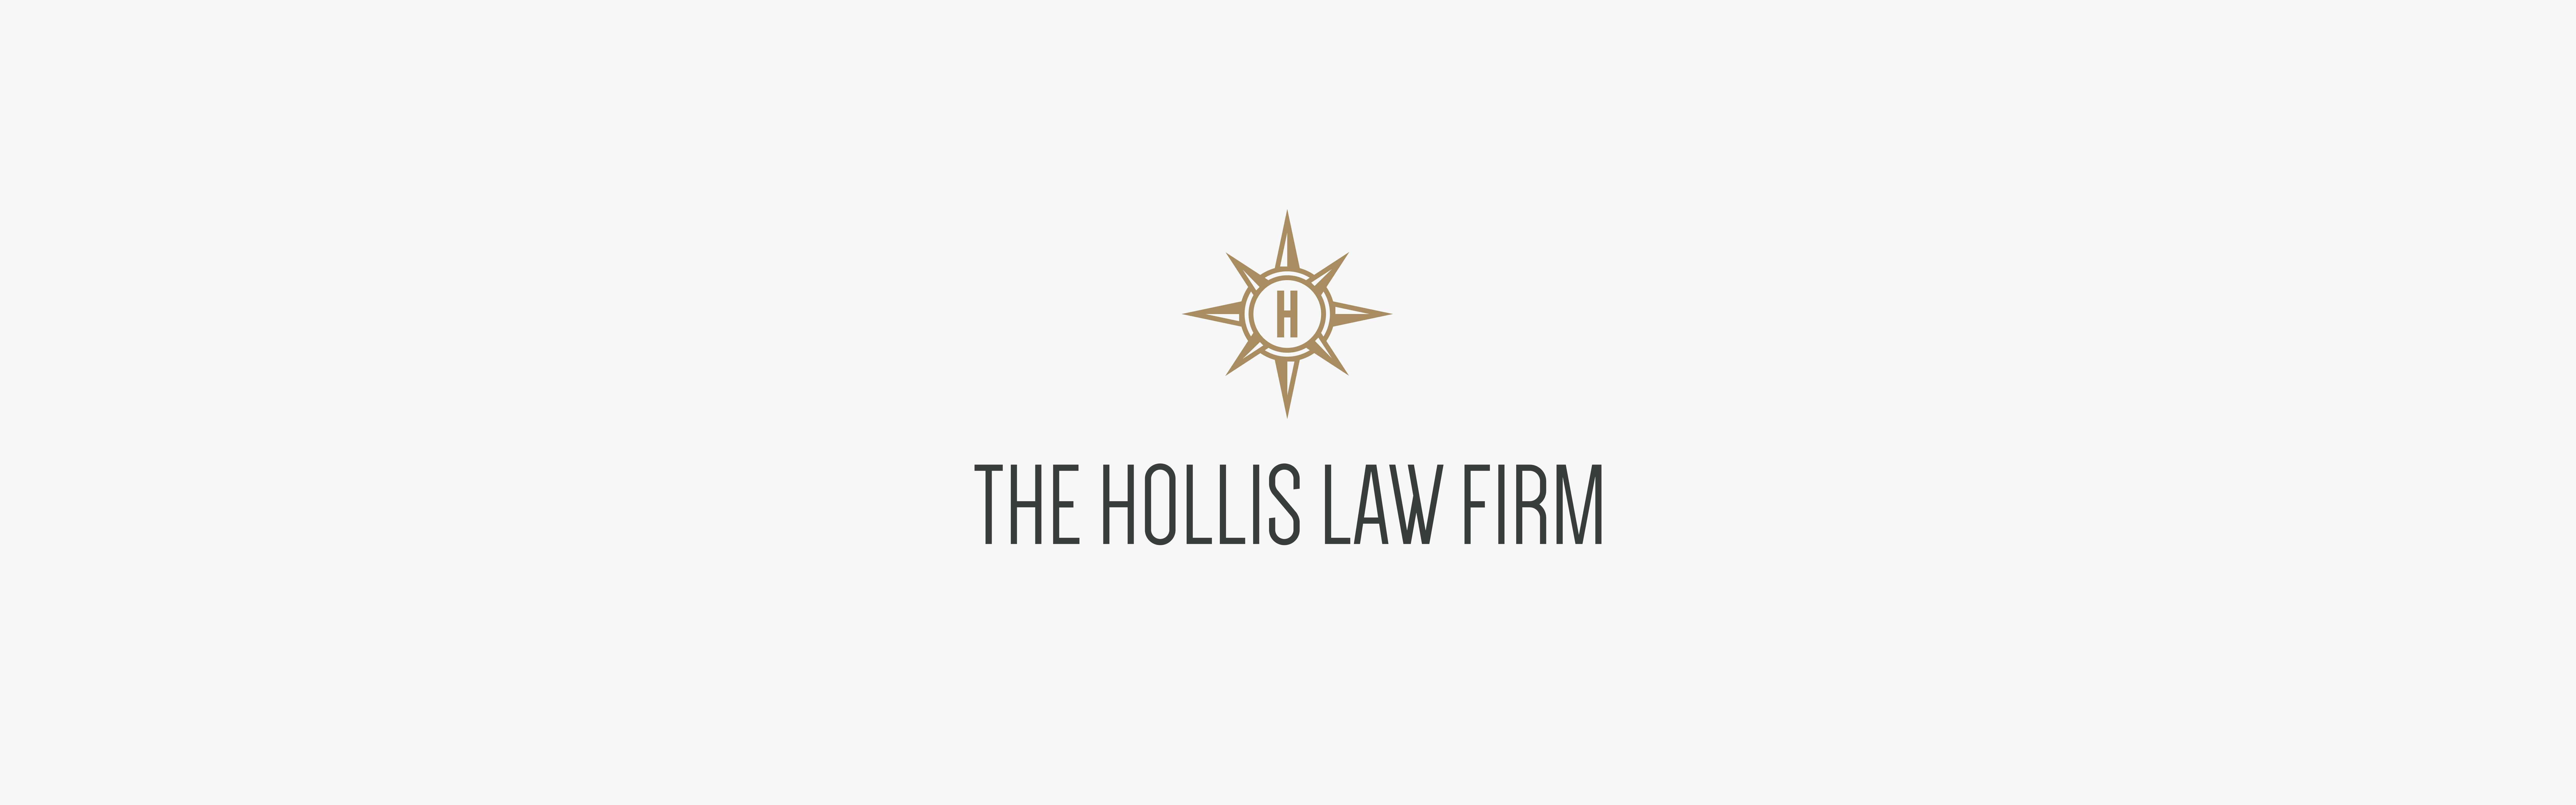 Logo of The Hollis Law Firm, featuring a stylized compass above the firm's name on a plain background.